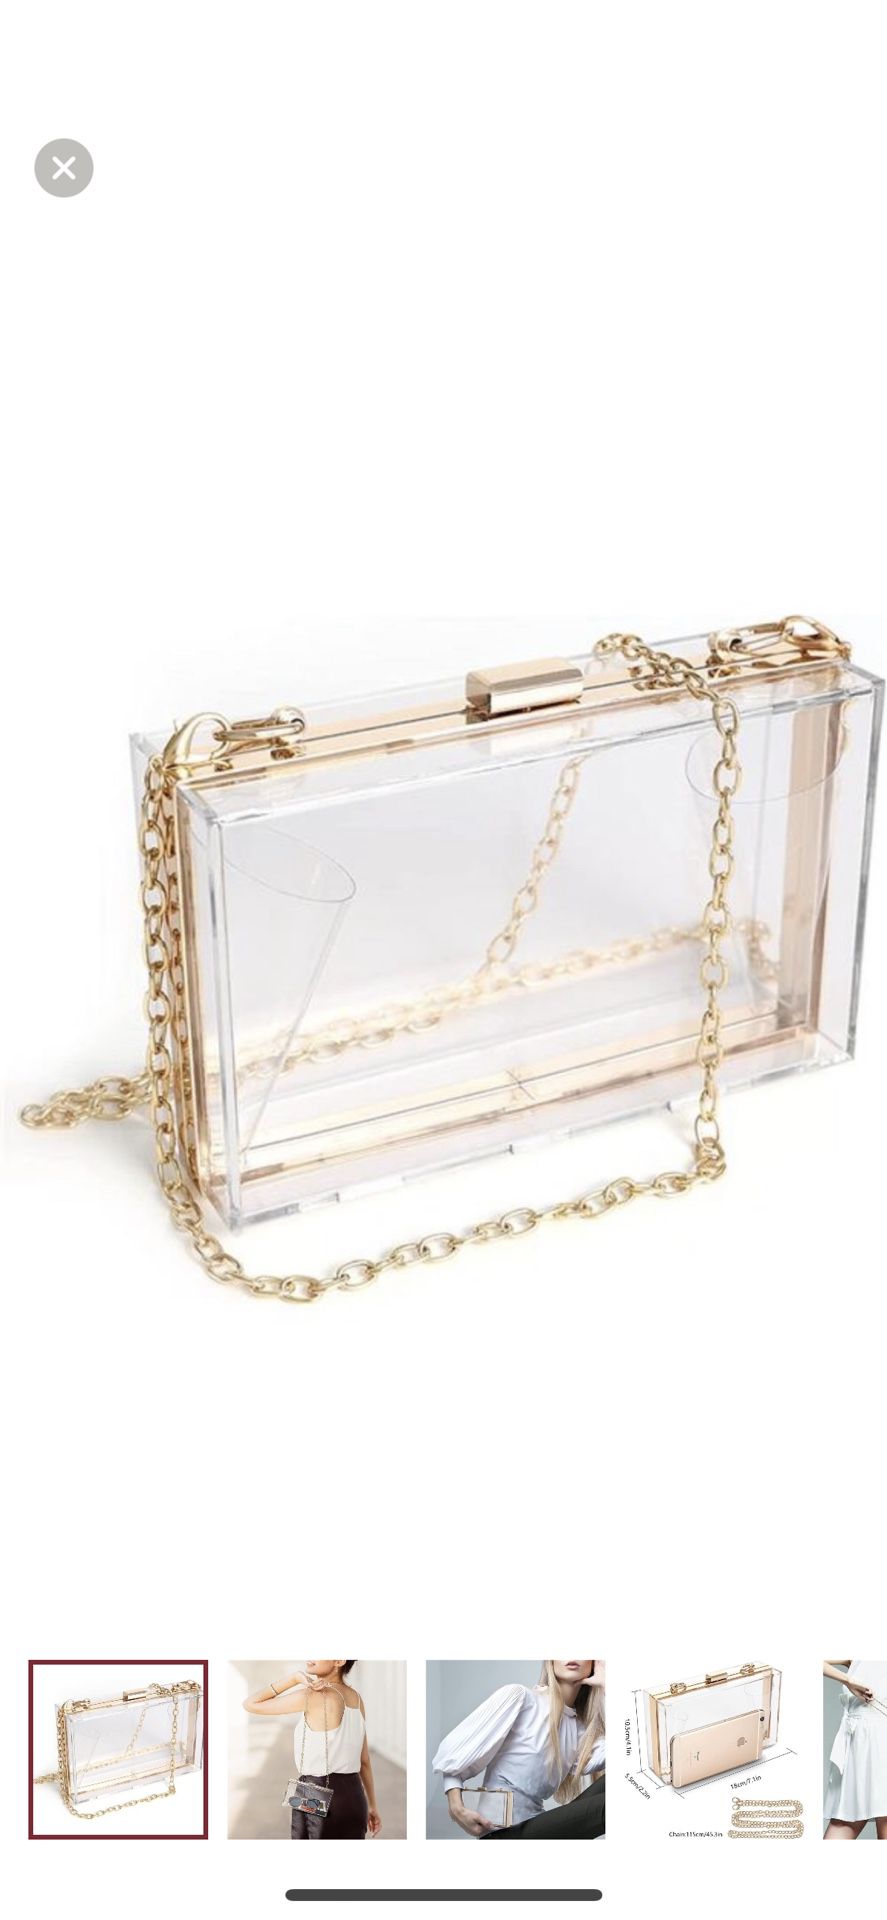 Womens Clear Purse Clutch Bag Shoulder Handbag With Removable Gold Chain Strap